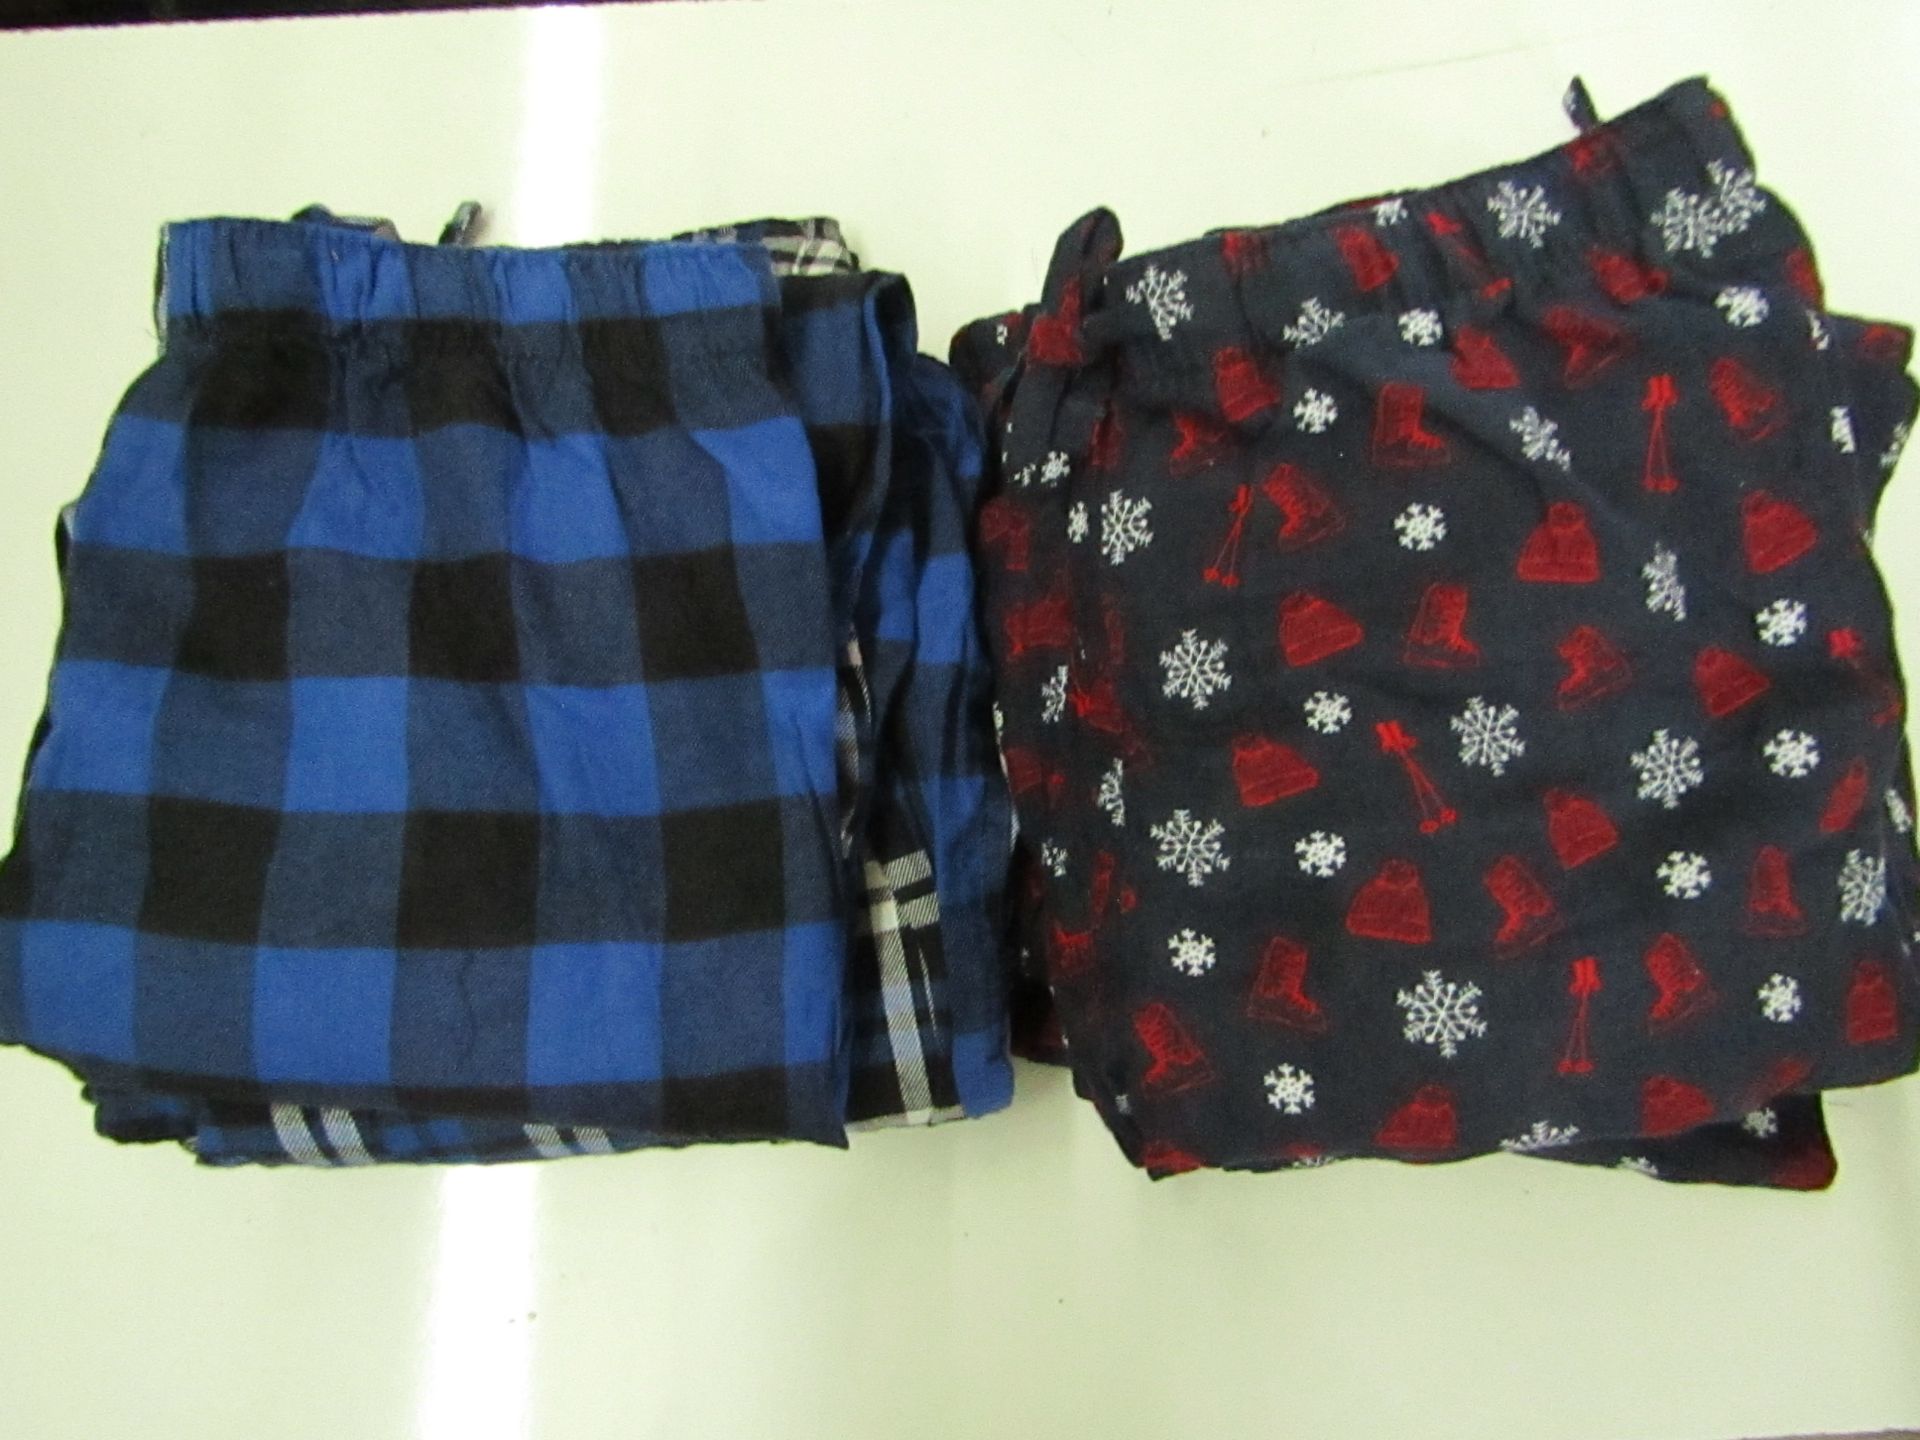 10 X Pairs of Mens Fleecy Pyjama Bottoms Size M ( May Need Washing as They Have Been Stored And